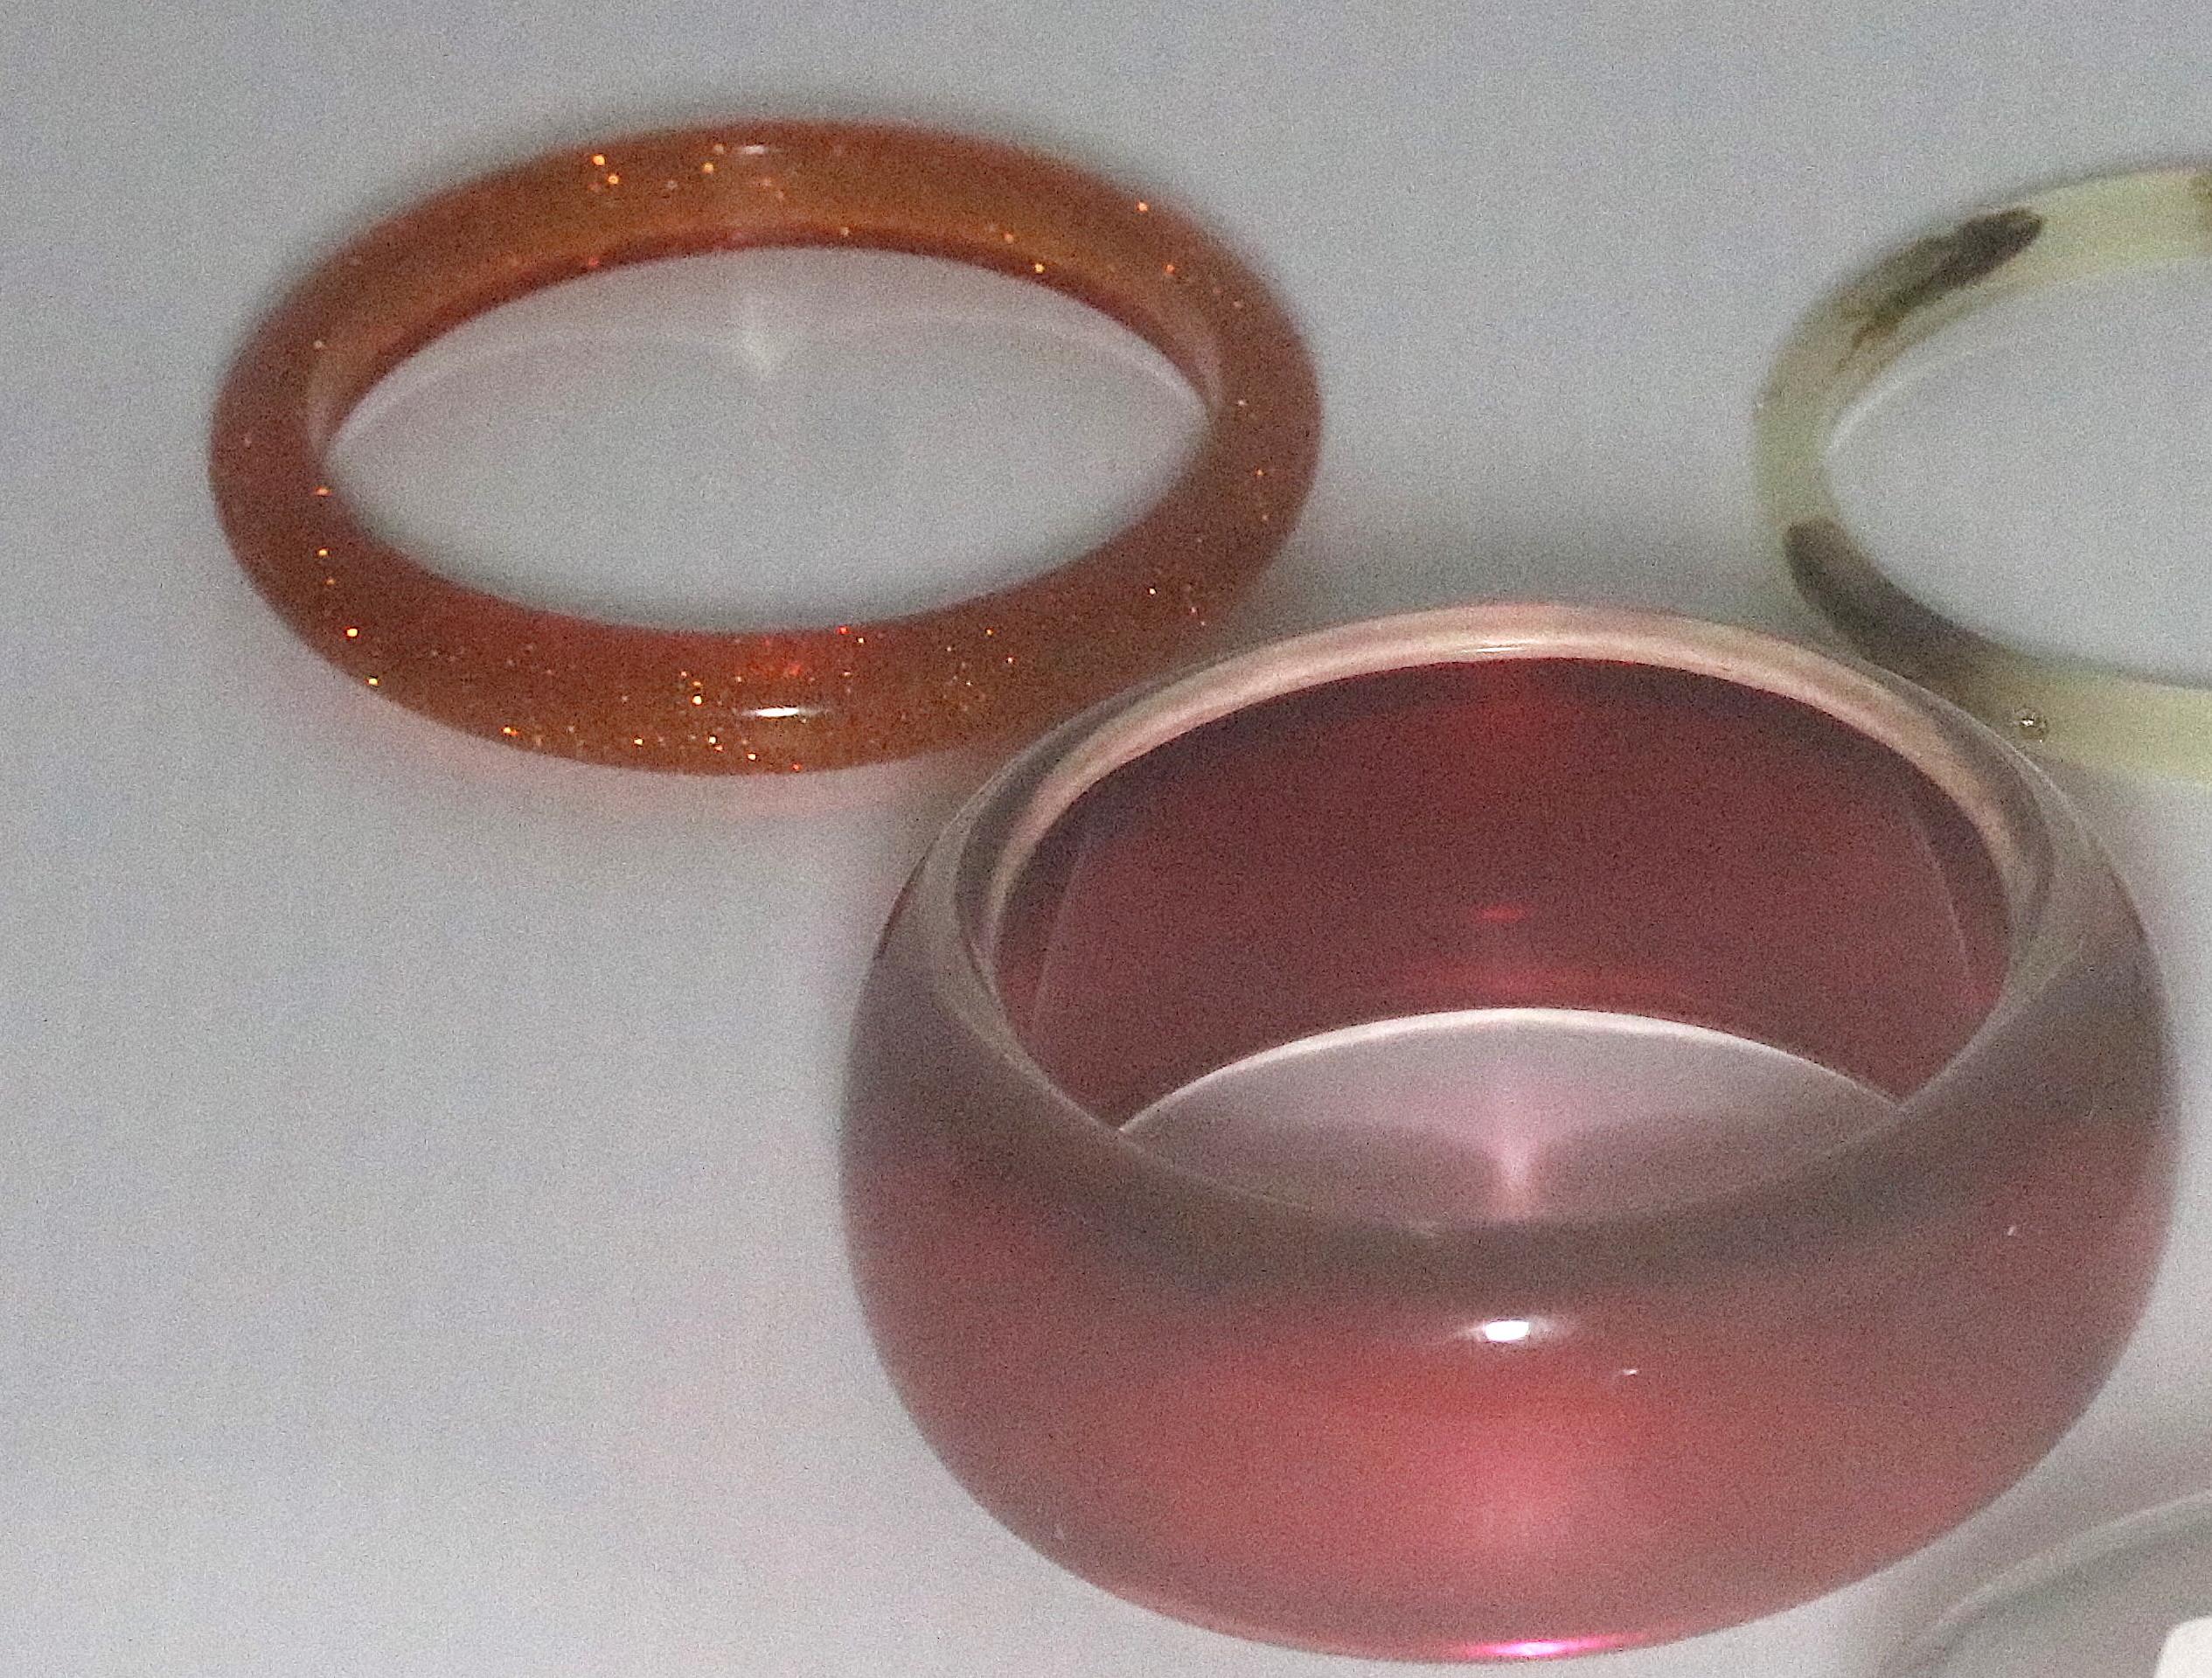 A Collection of 5 Bangle Thermoplastic Bracelets-2 translucent red, 1 translucent gold and 1 translucent silver, both with inset sparkles,  from the 1950s and one Tortoise lucite with 5 cz's inset all around from Alexis Bittar- 1990s  

all standard